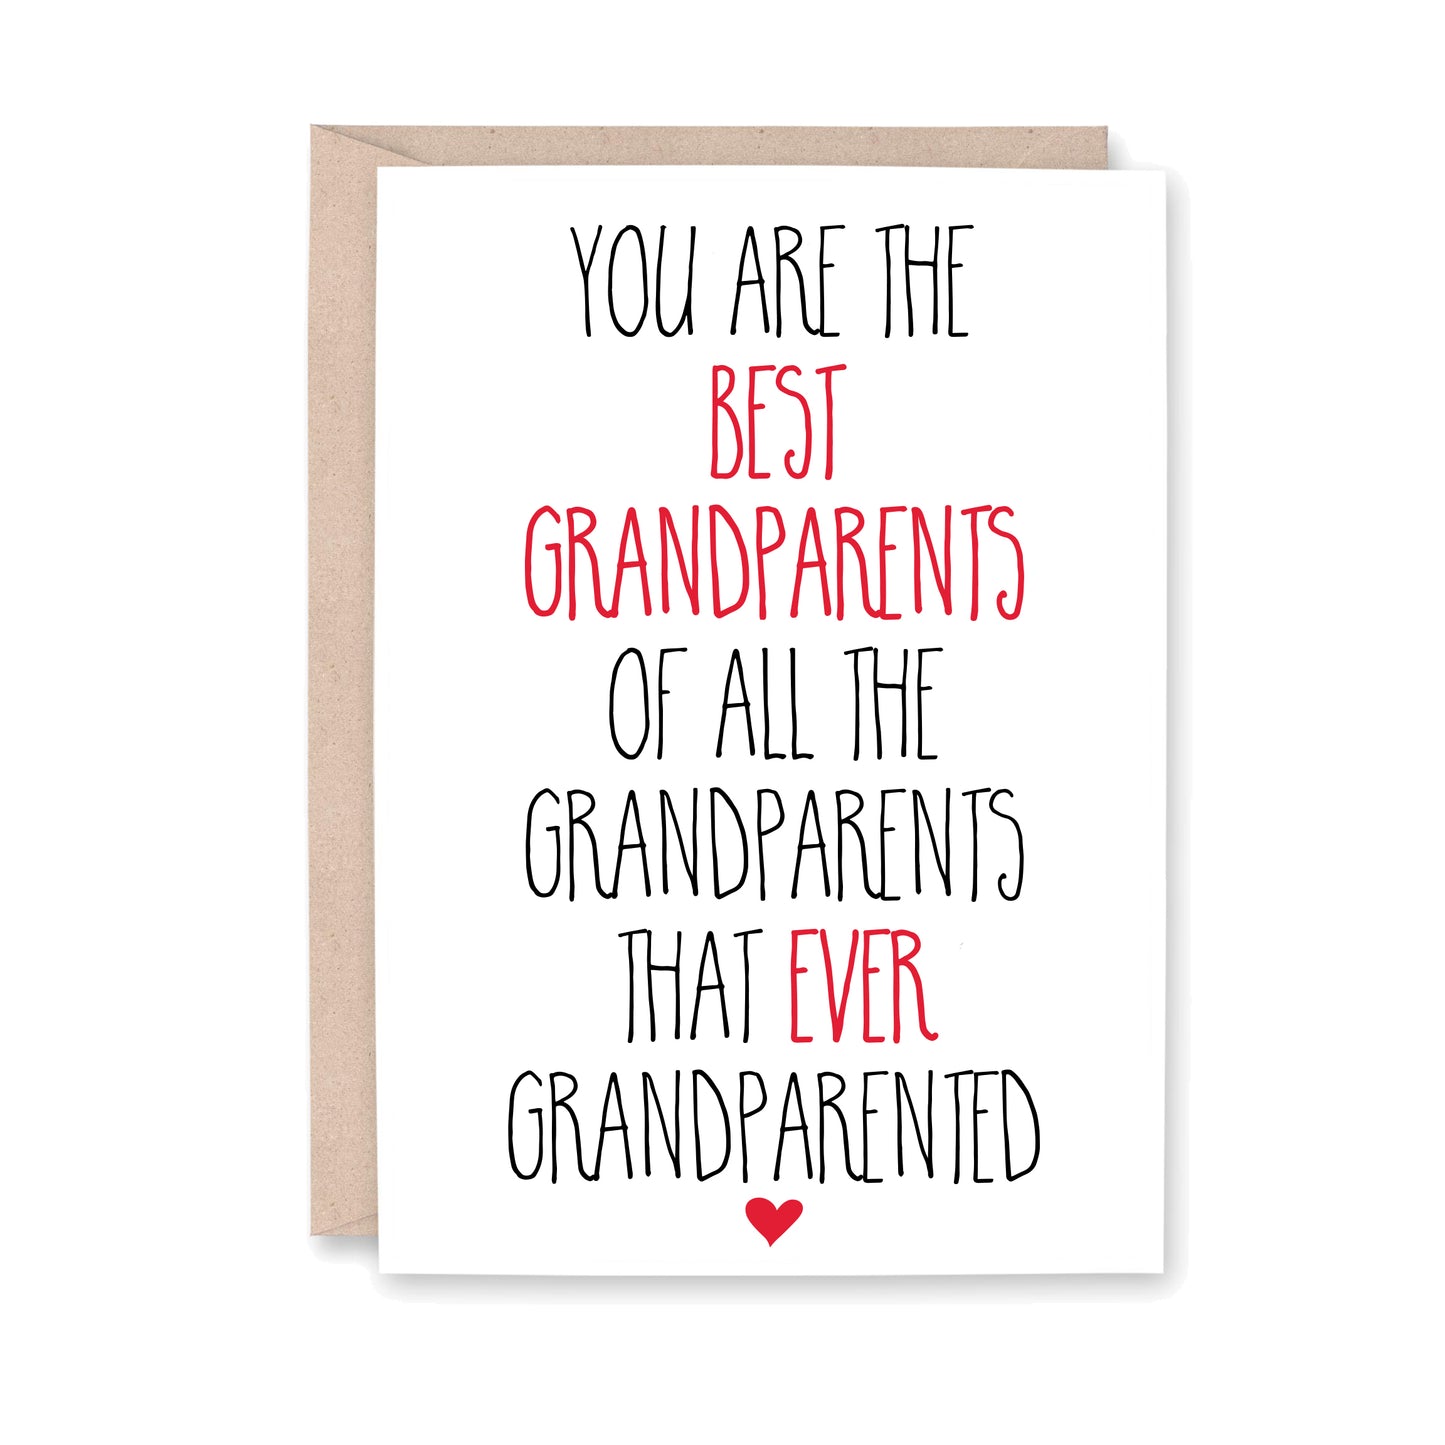 You are the best grandparents of all the grandparents taht ever grandparented greeing card